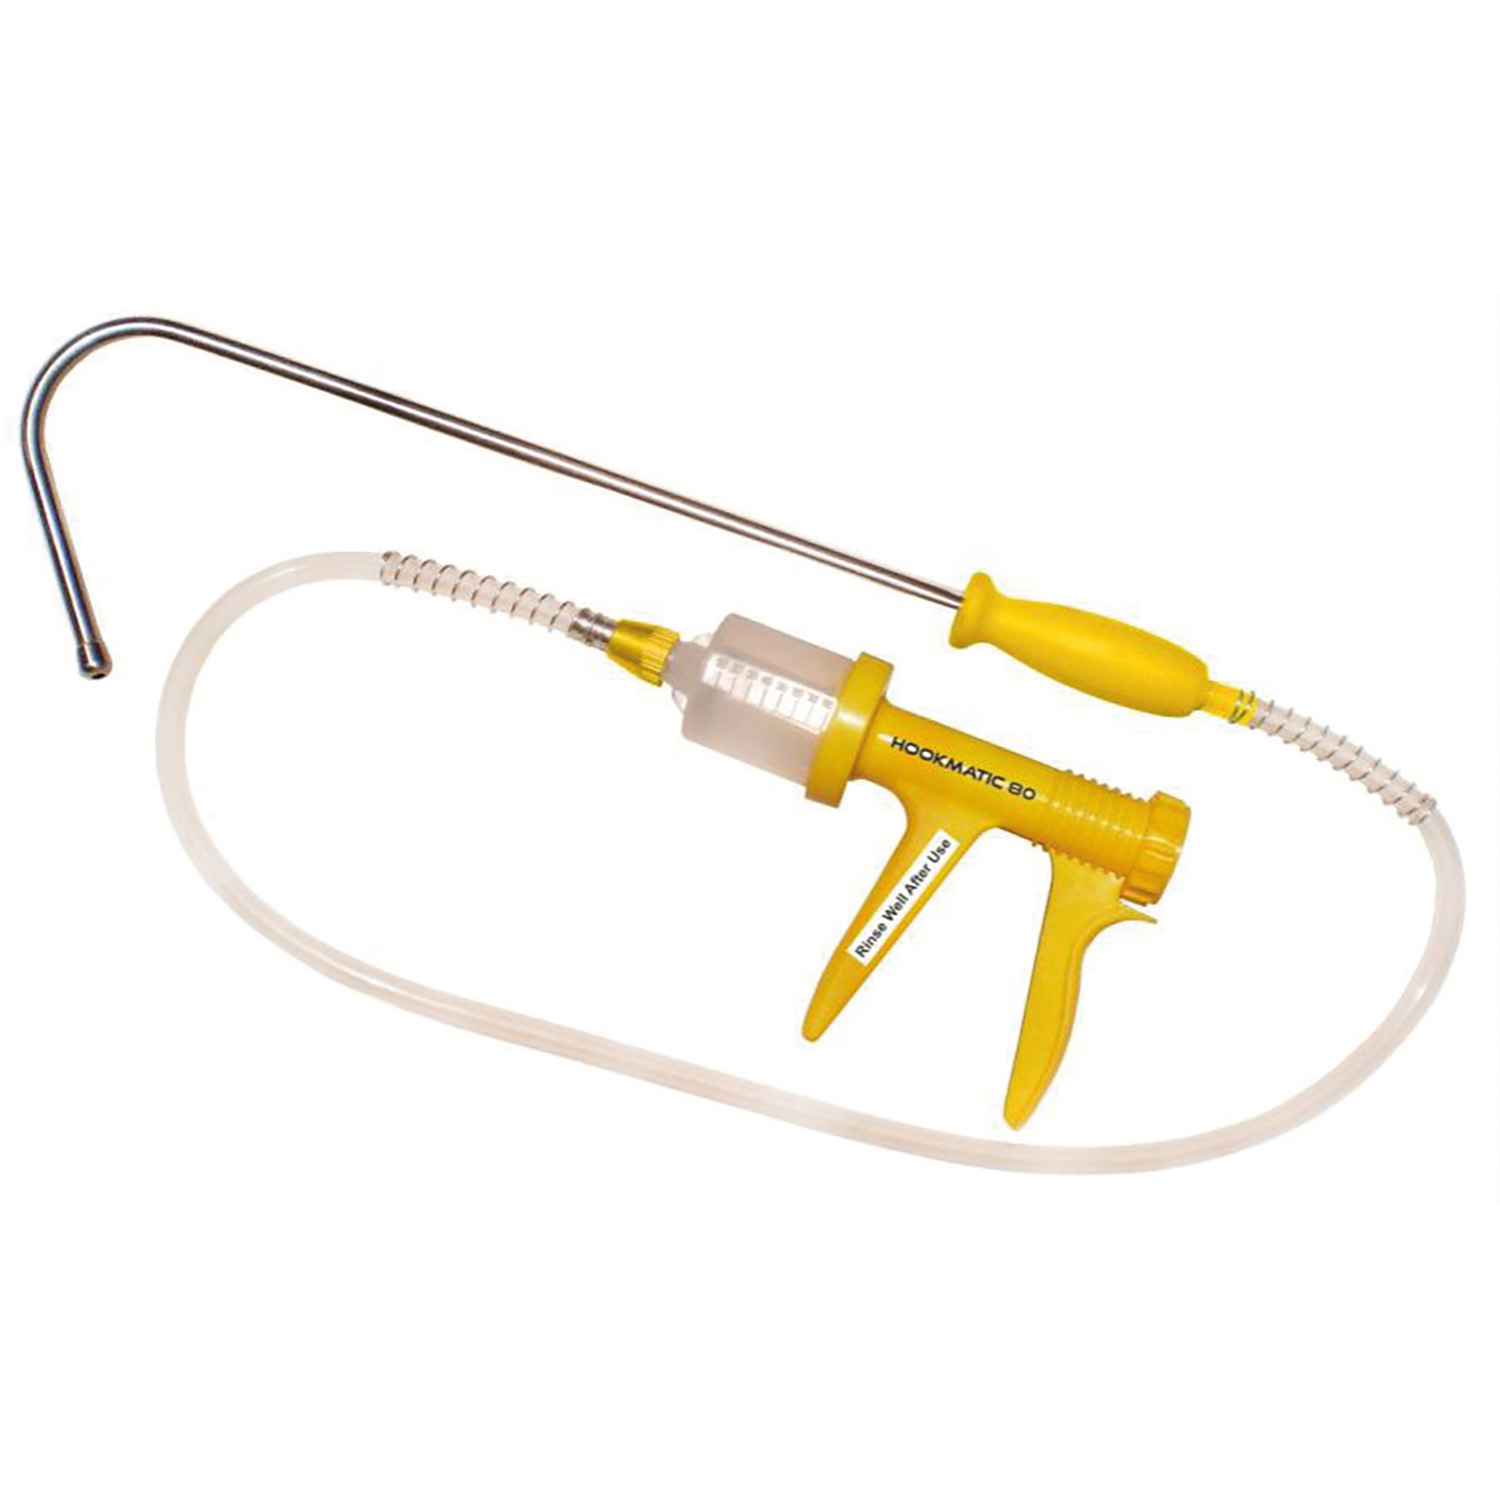 CHANELLE TRIBEX 10% CATTLE HOOK DRENCHER